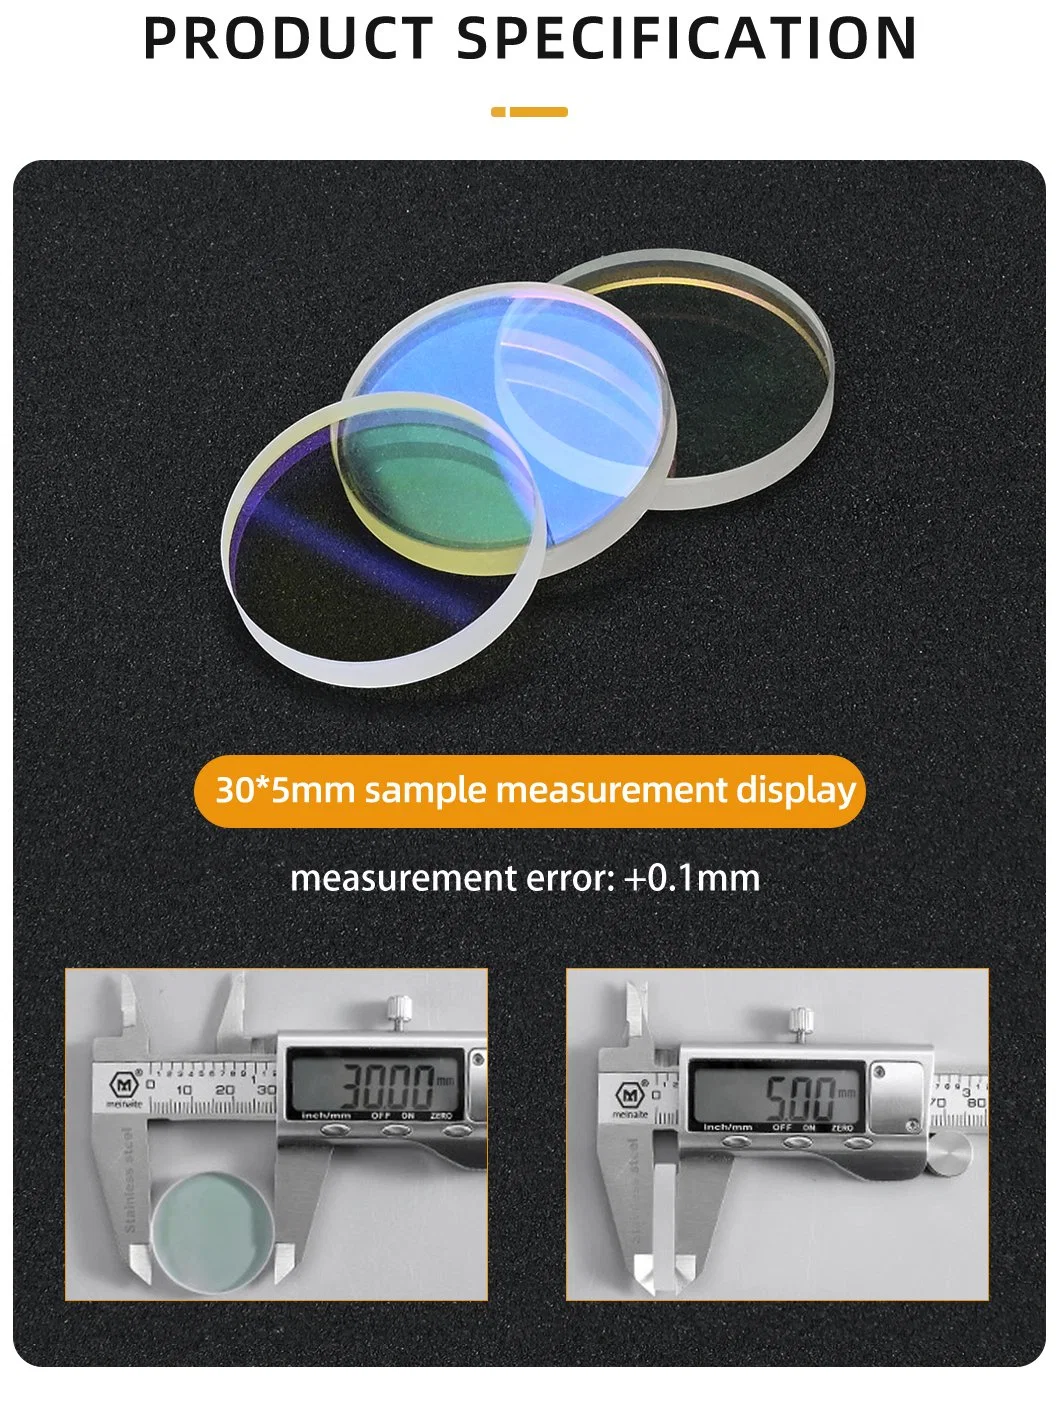 Laser Protective Lens Quartz Material Coated Optical Lenses Support Cstomized Flat Lenses with Light Transmittance Greater Than Ninety-Five Percent